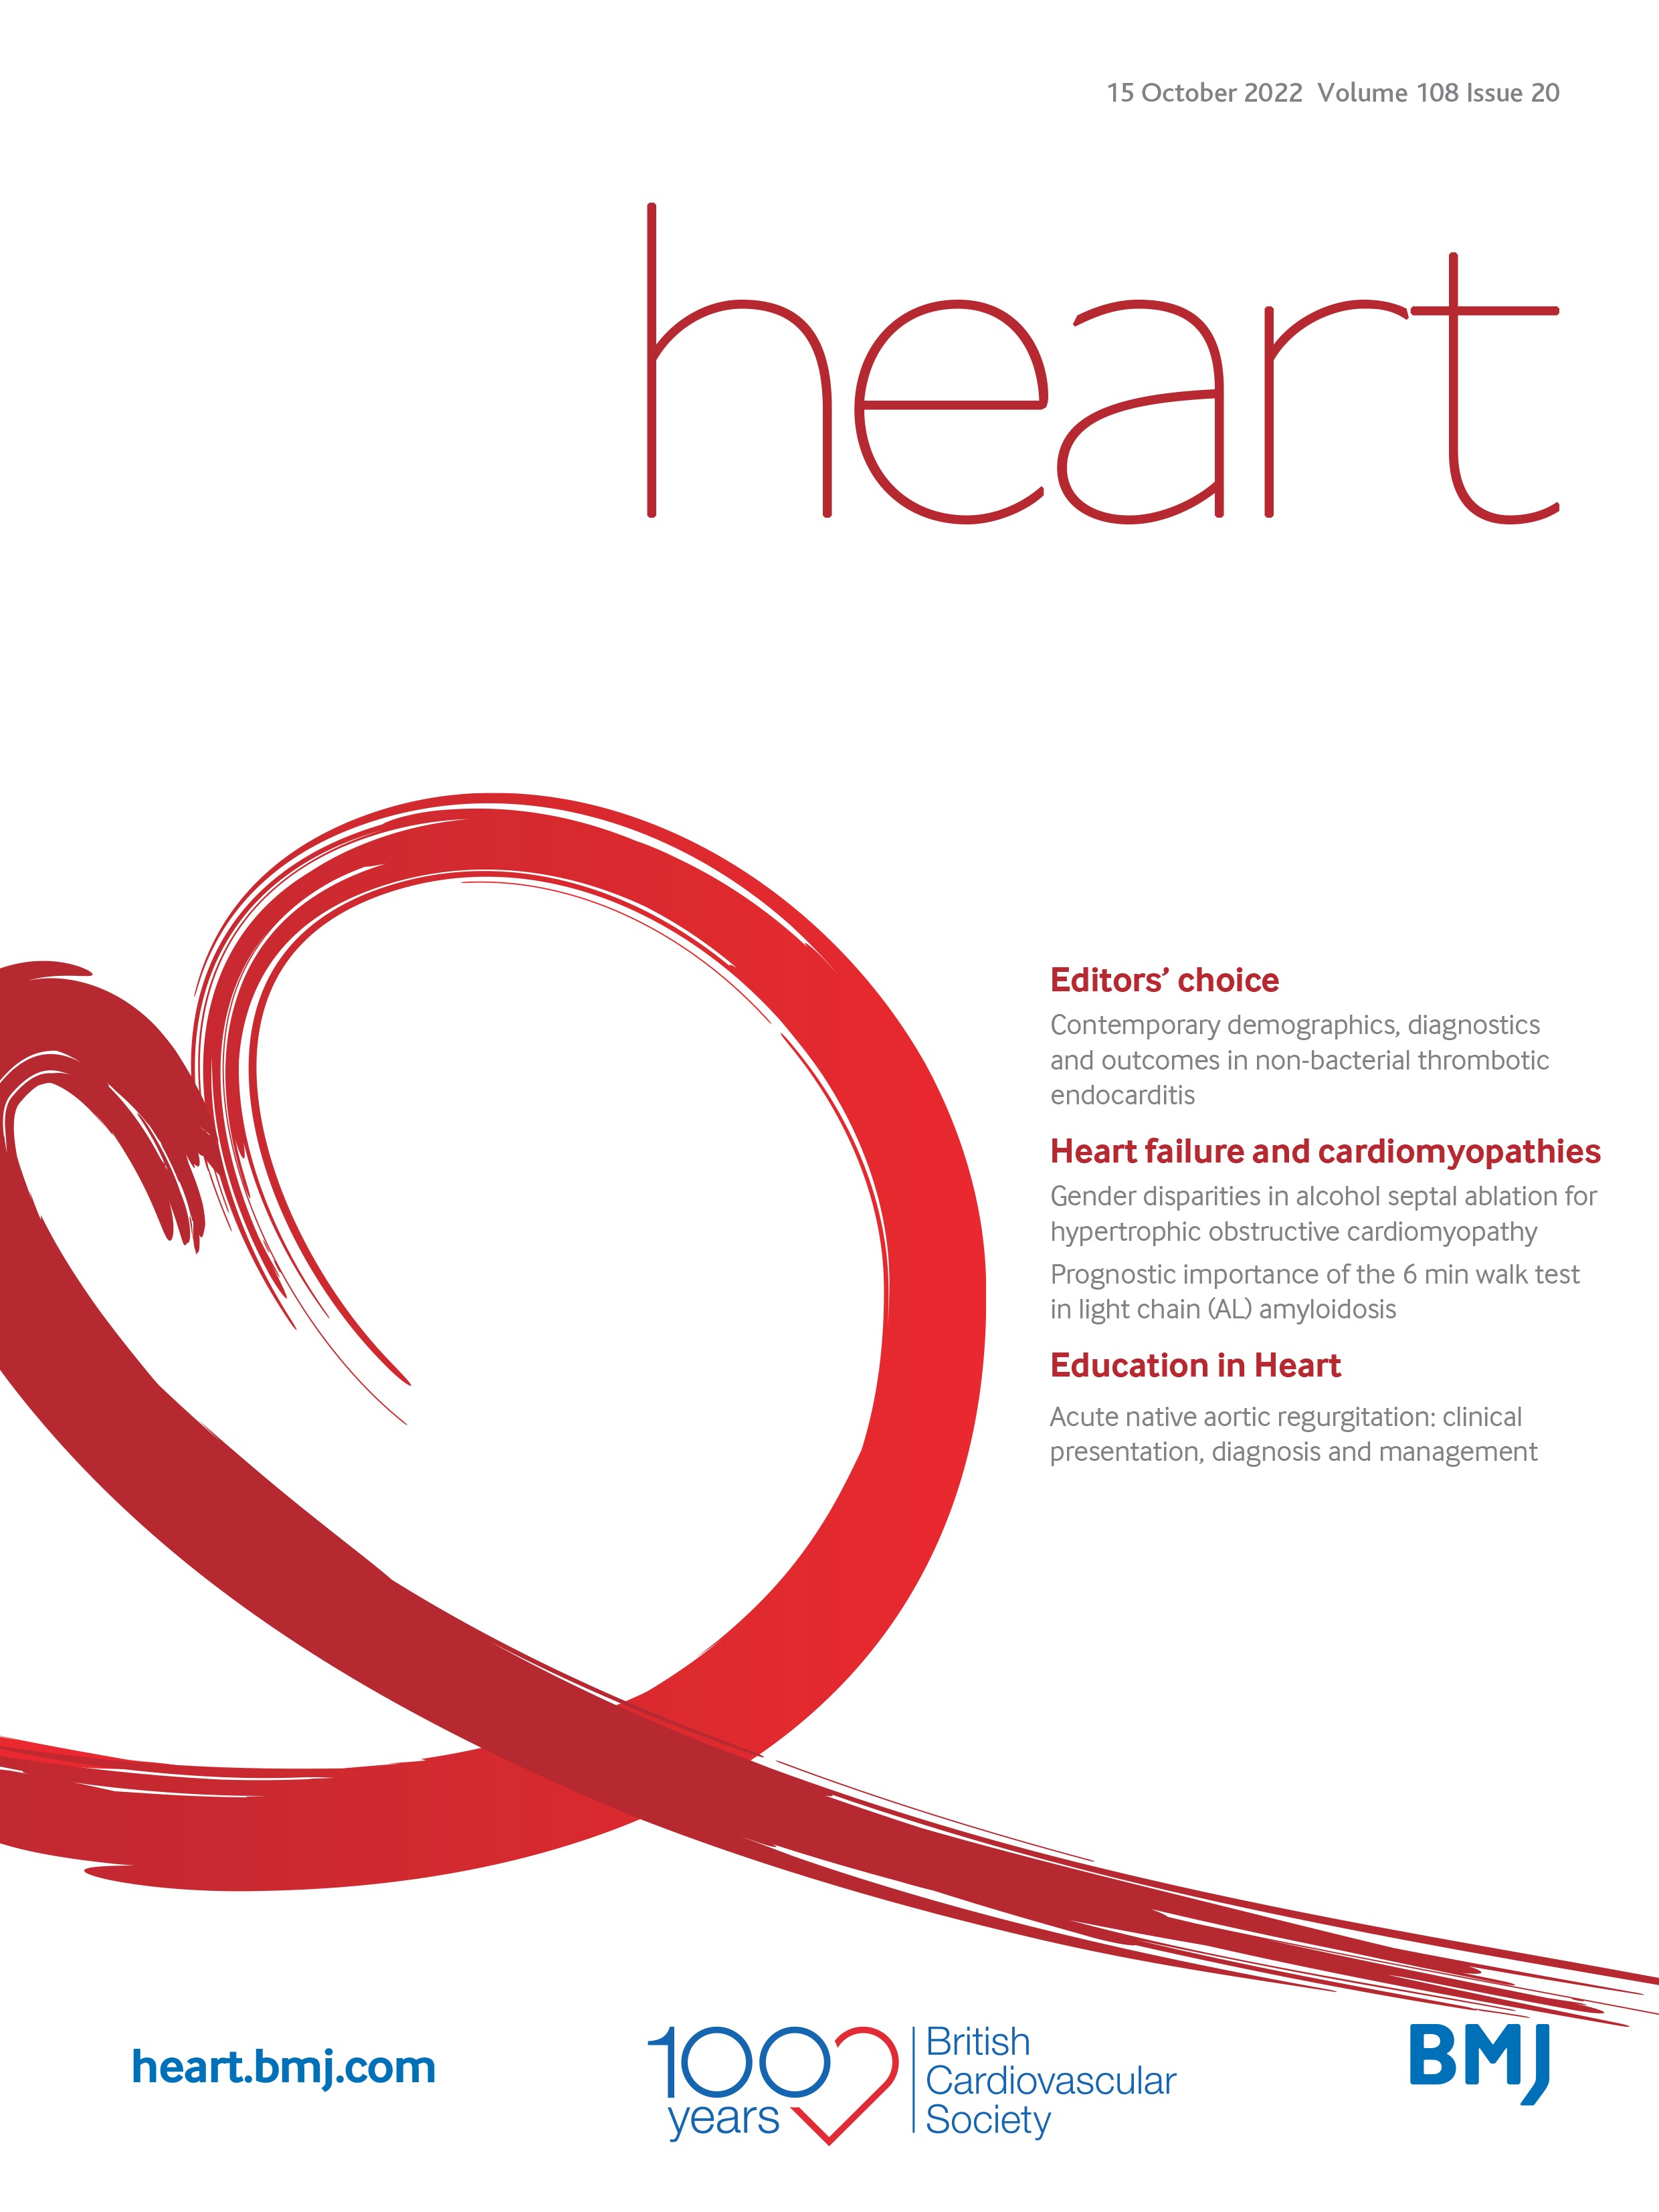 Exercise oxygen pulse kinetics in patients with hypertrophic cardiomyopathy